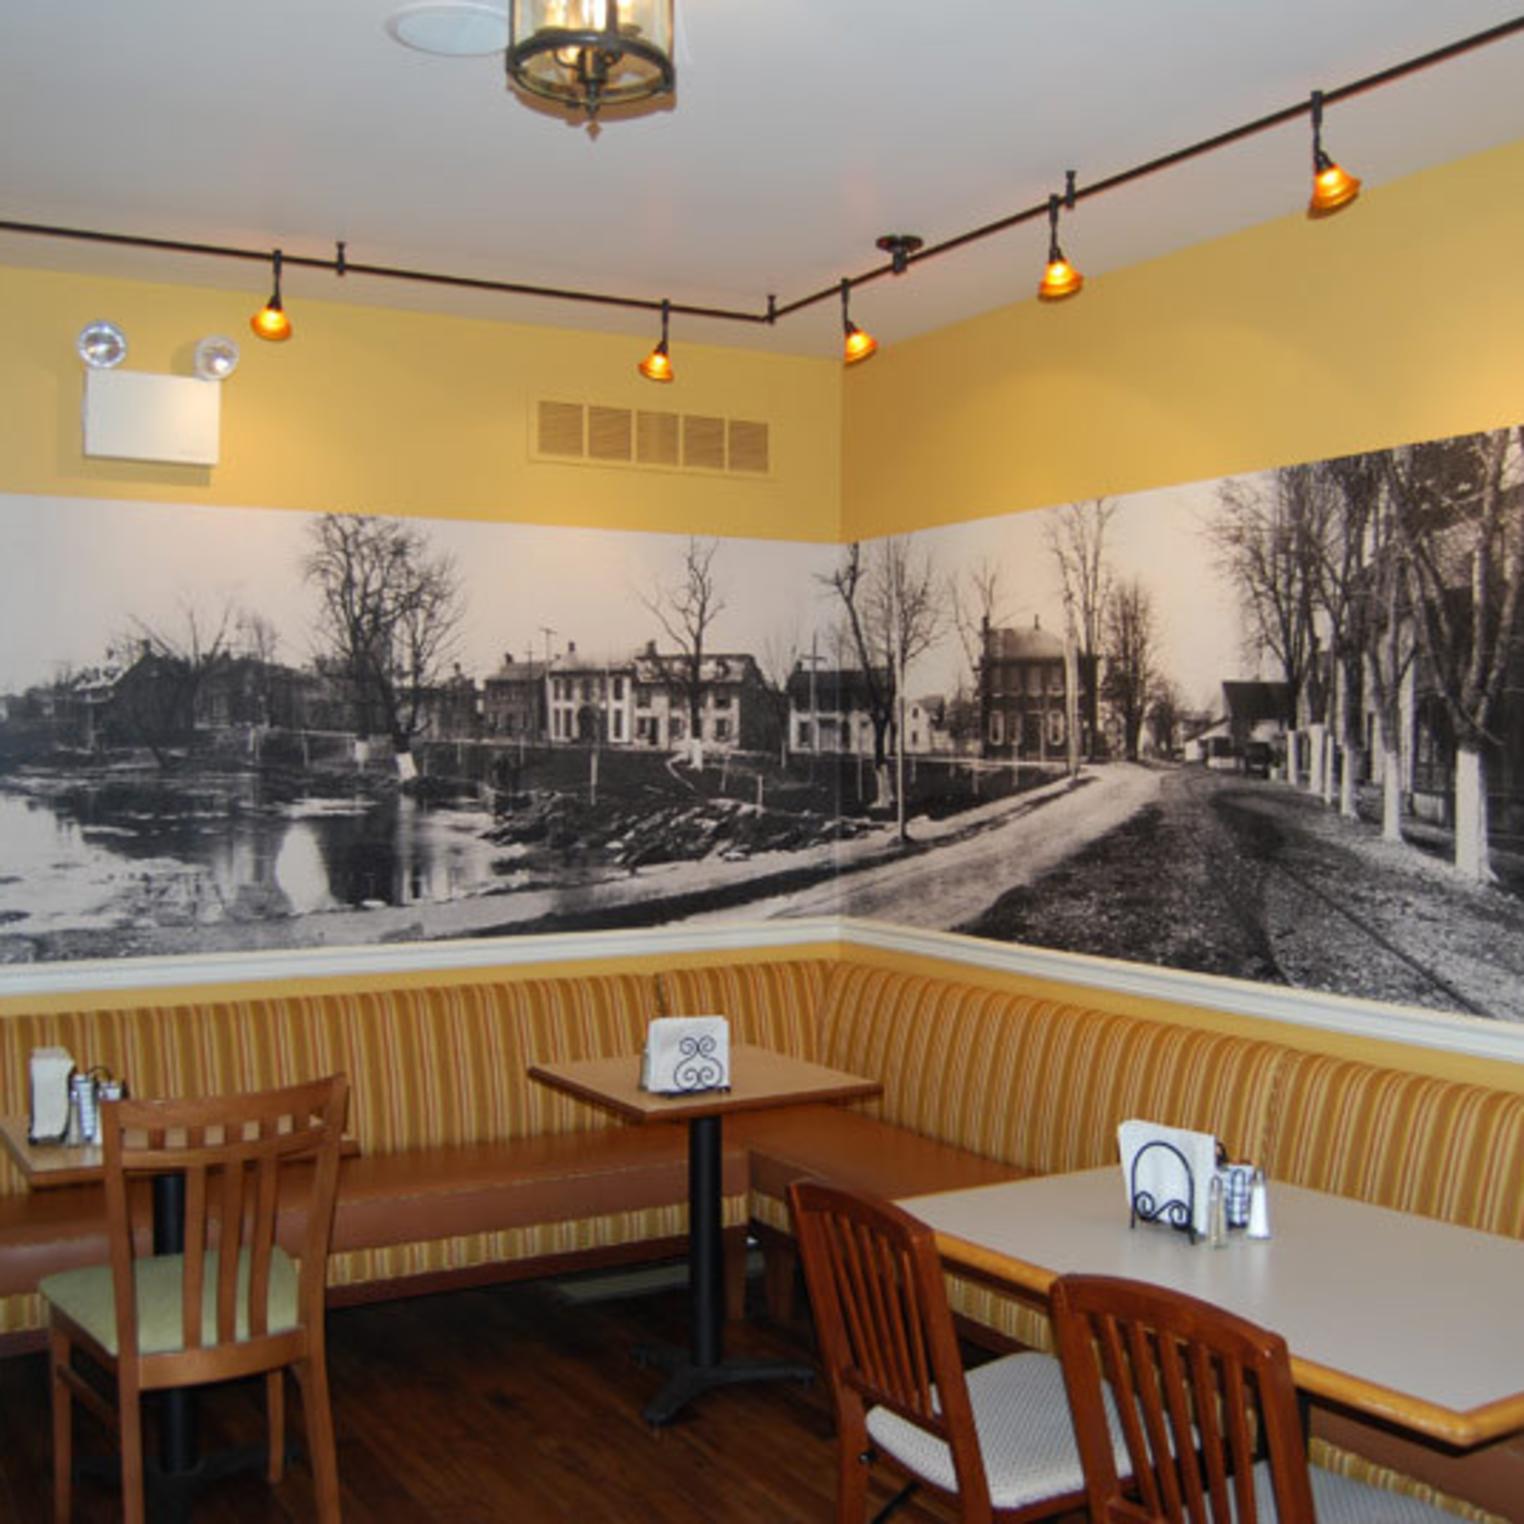 Boiling Springs Wall Mural at Caffe 101